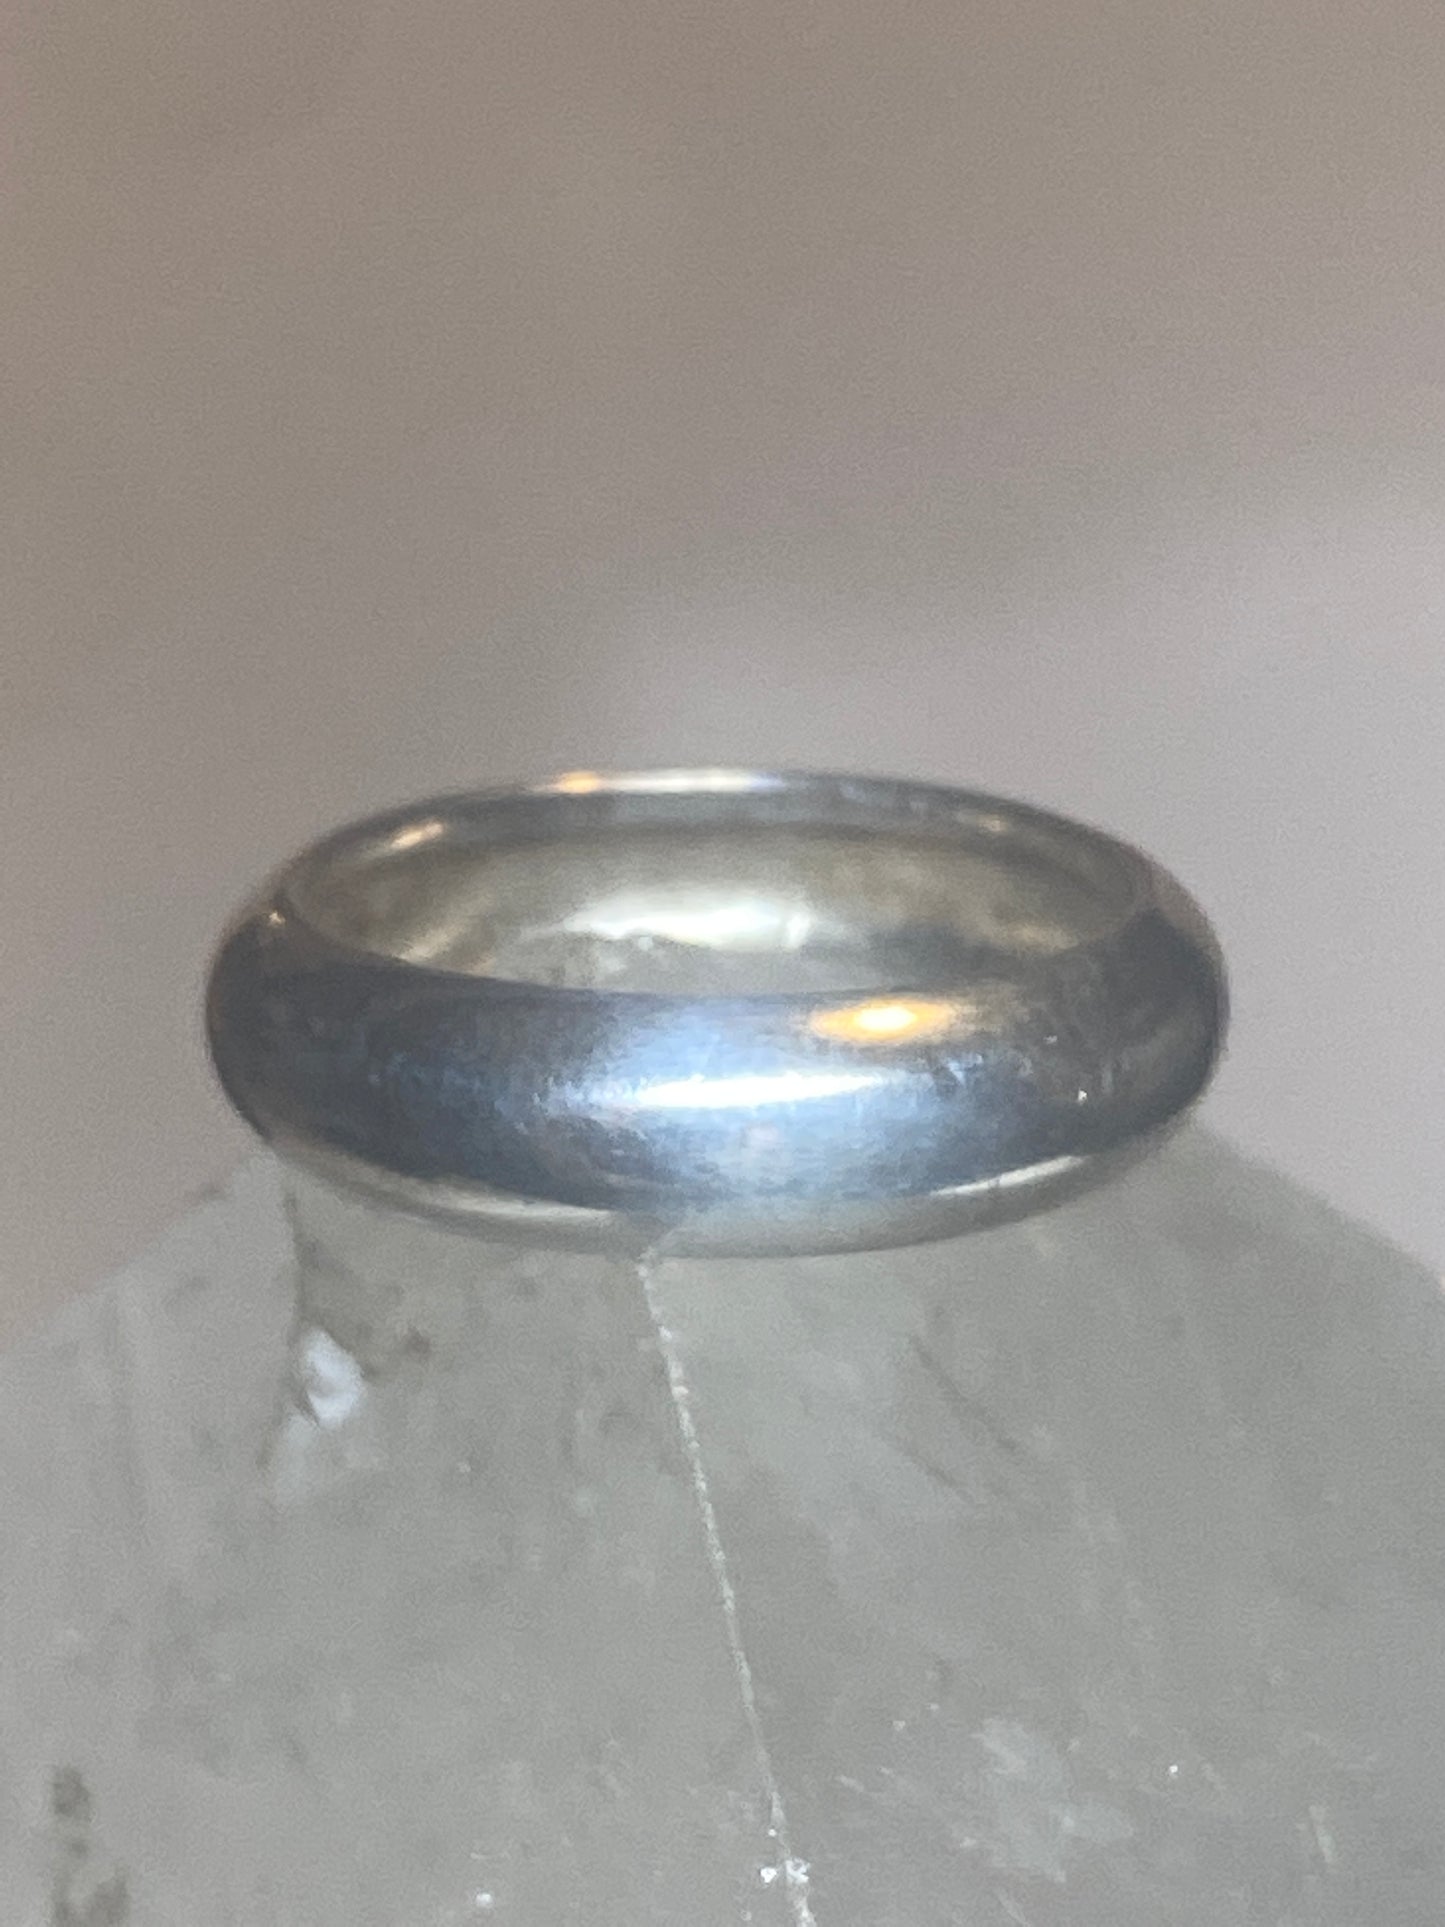 Plain ring wedding band size 5.50 sterling silver  h